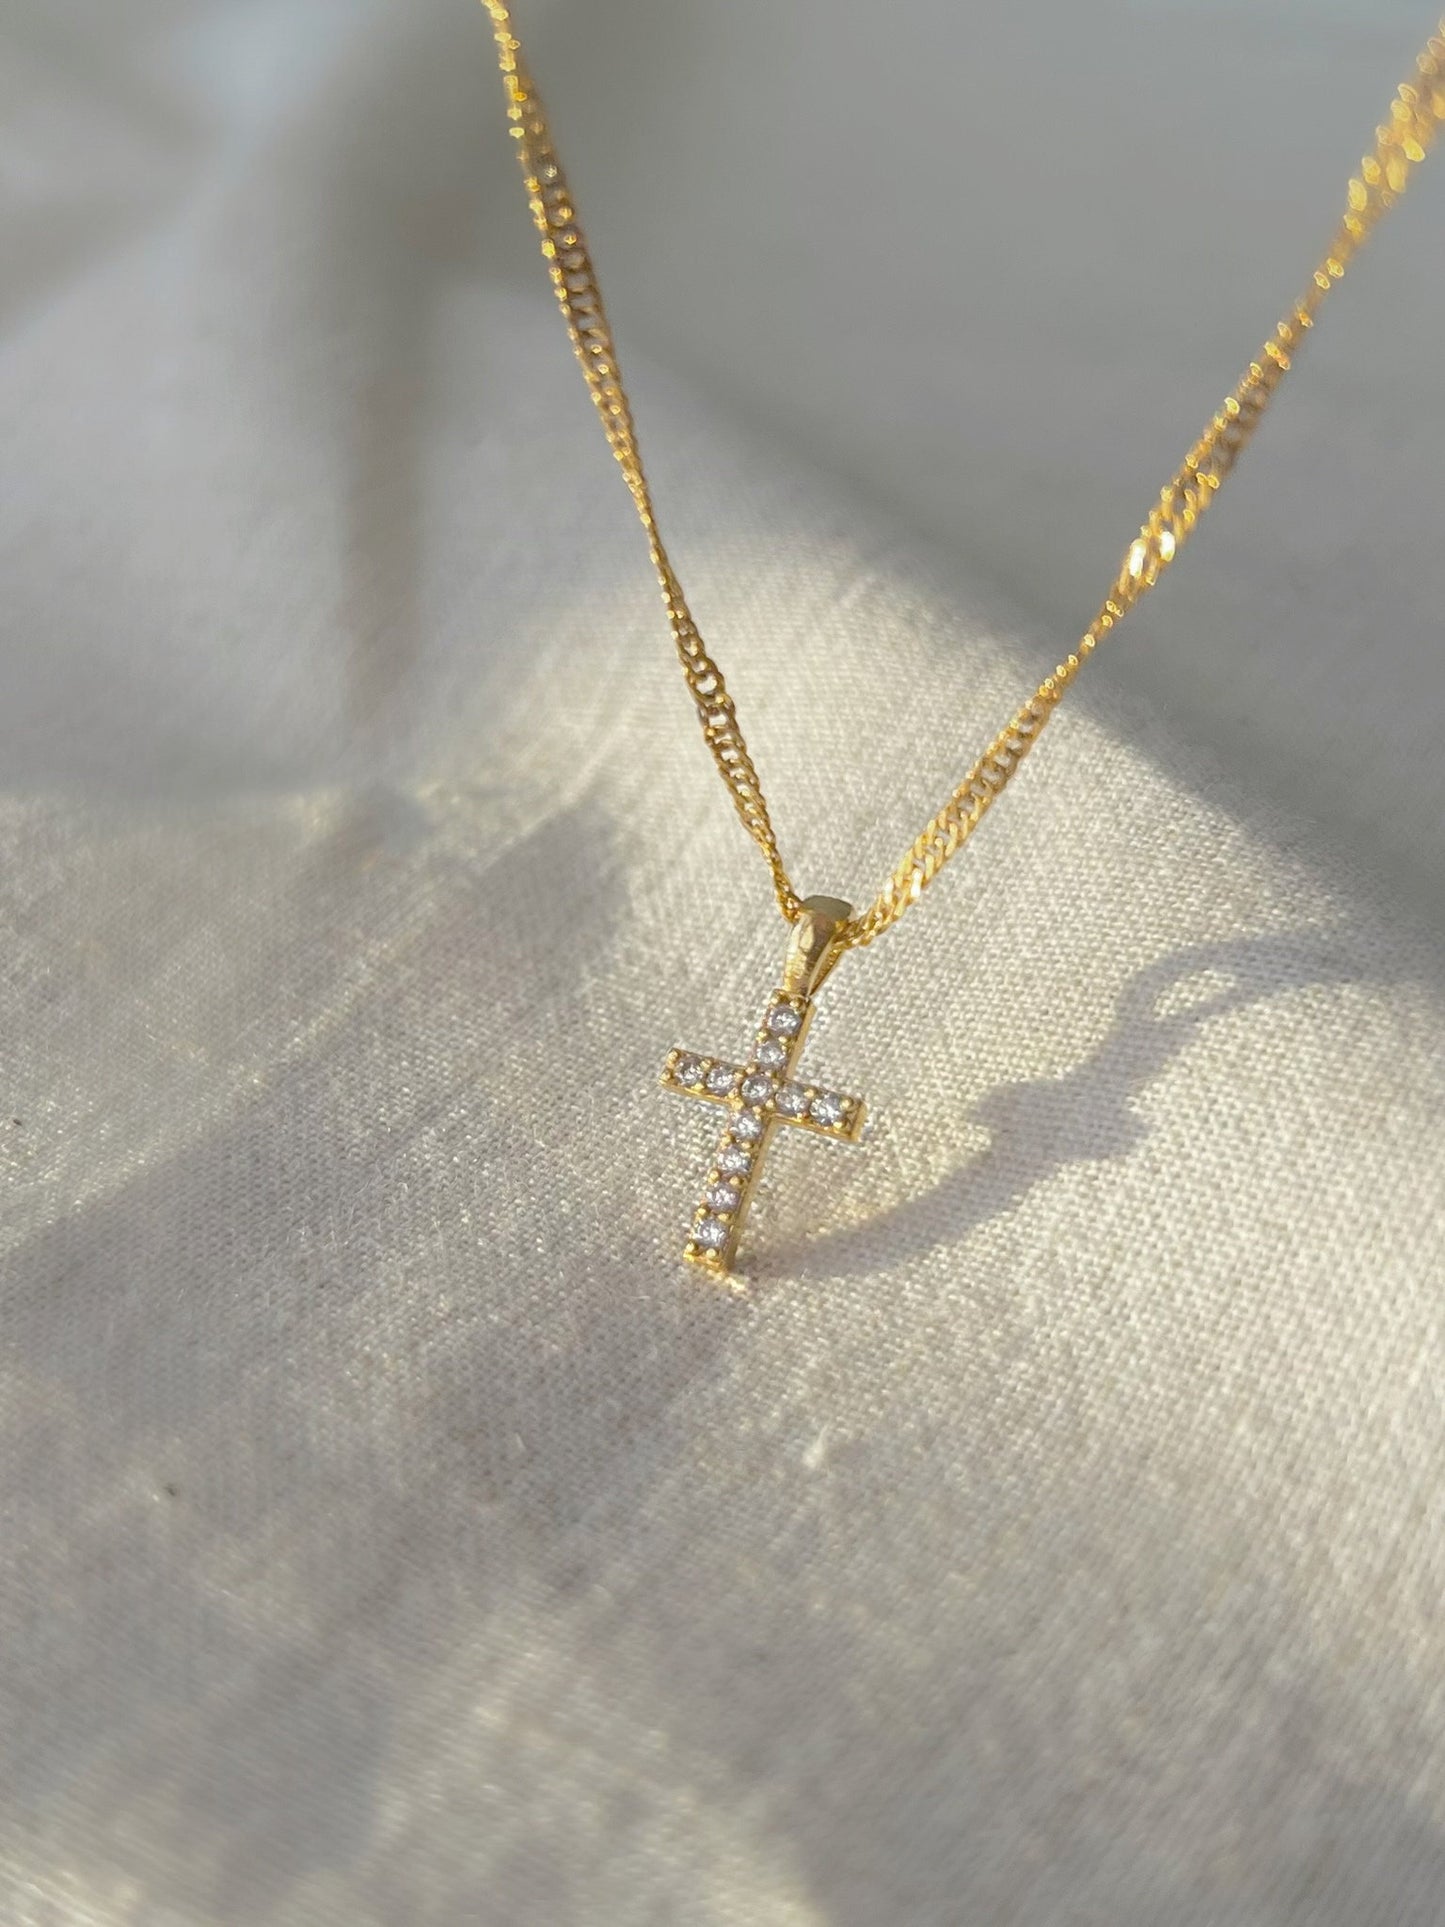 Cross necklace women, sideways cross necklace, gold cross necklace, dainty jewelry, gifts for her, gift for women, necklaces for women